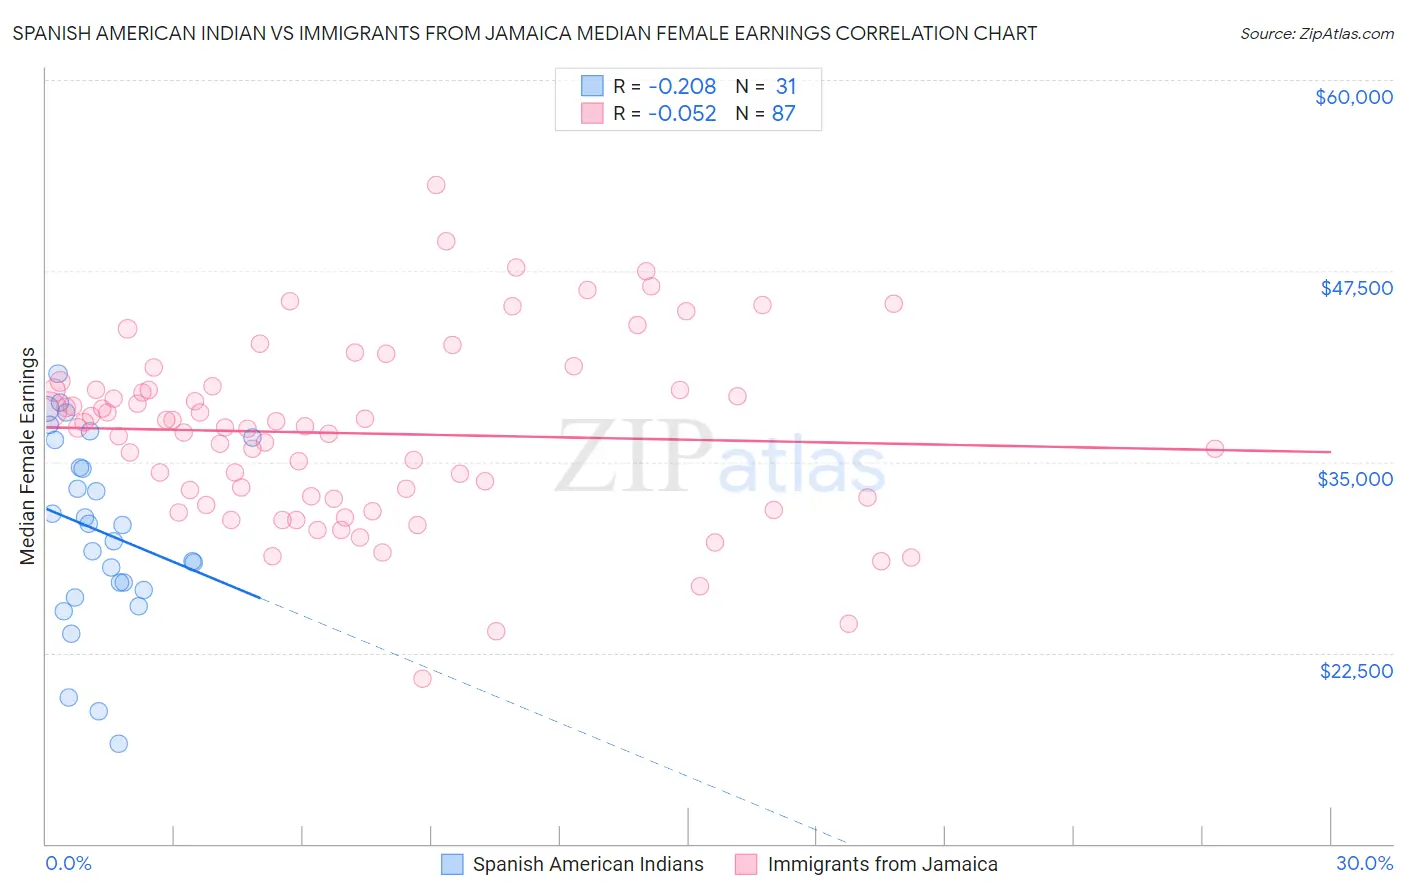 Spanish American Indian vs Immigrants from Jamaica Median Female Earnings